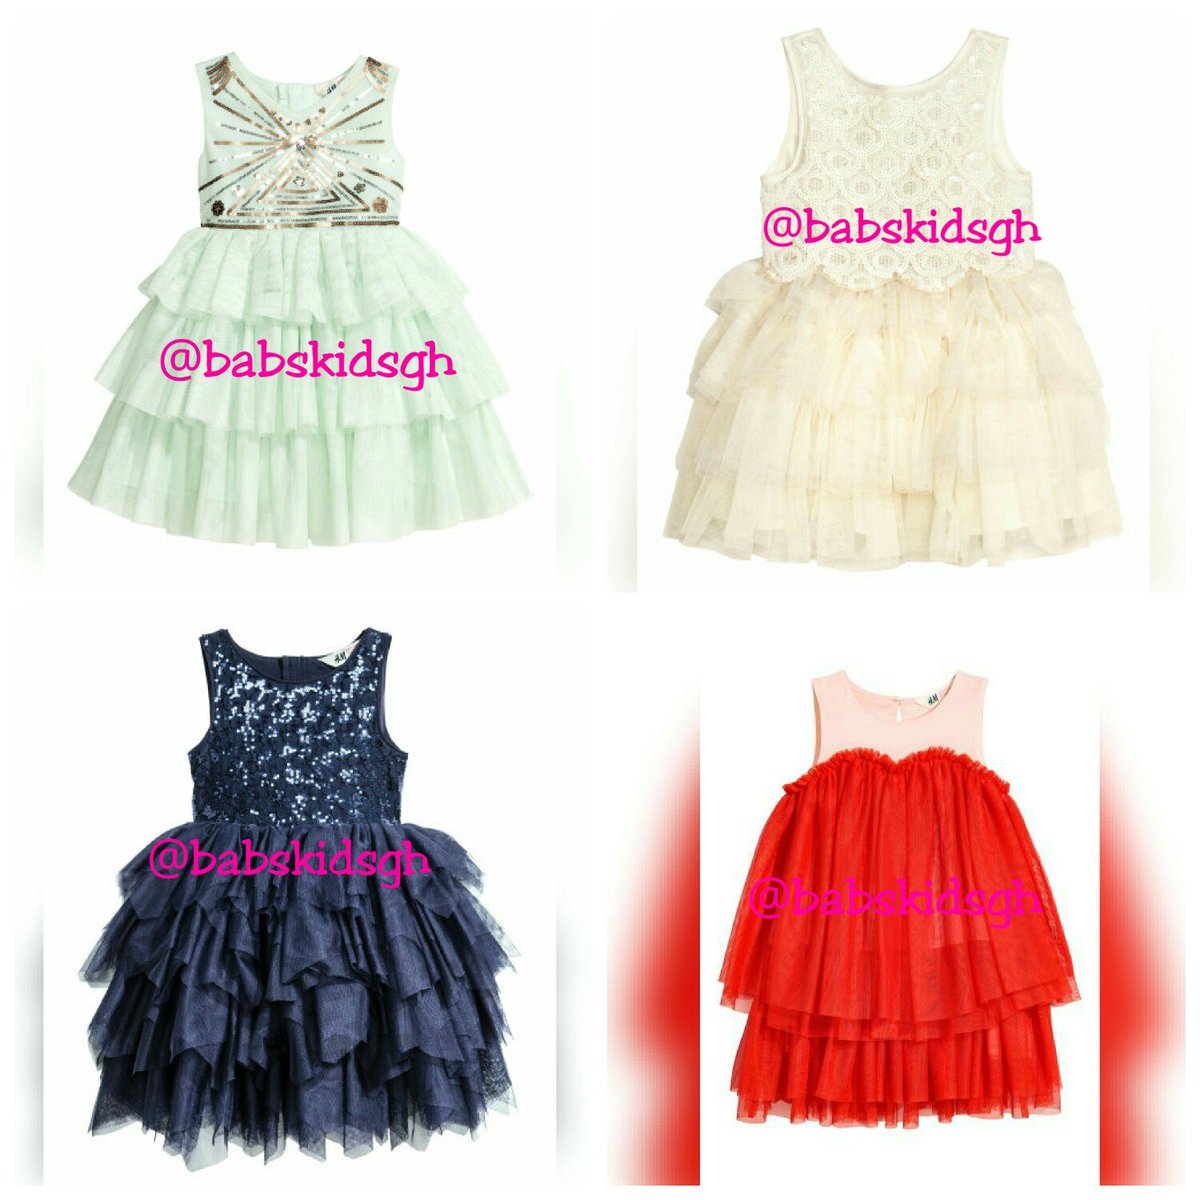 #classykids #qualityforless #supertutu  #thesedresseshavesomethingtosay #deliveryserviceavailable #kidsfashionourpriority